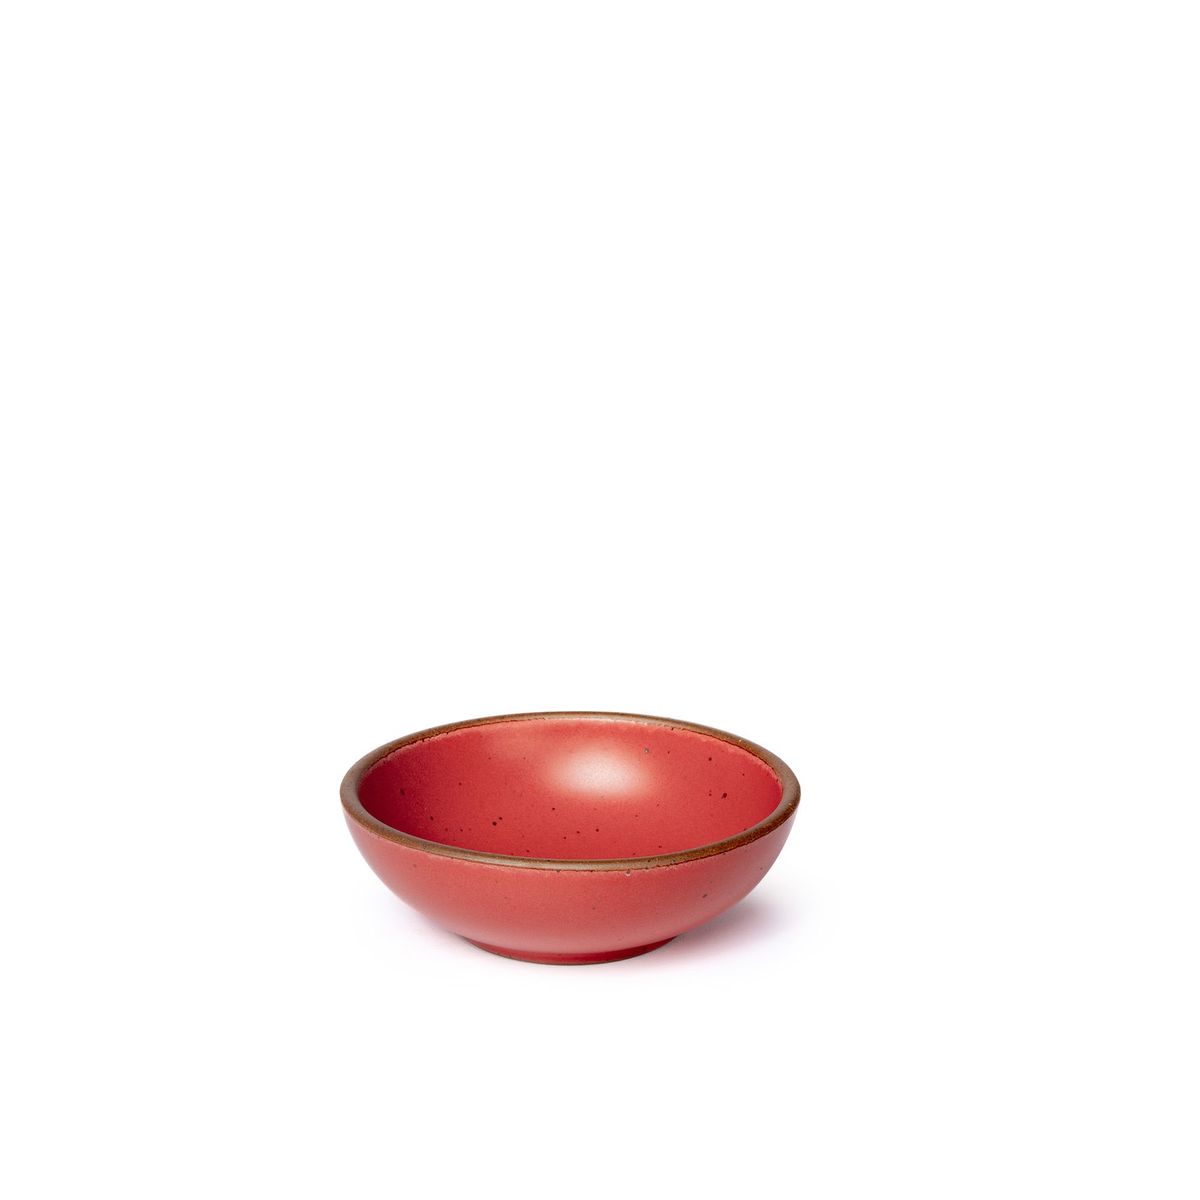 A small shallow ceramic bowl in a bold red color featuring iron speckles and an unglazed rim